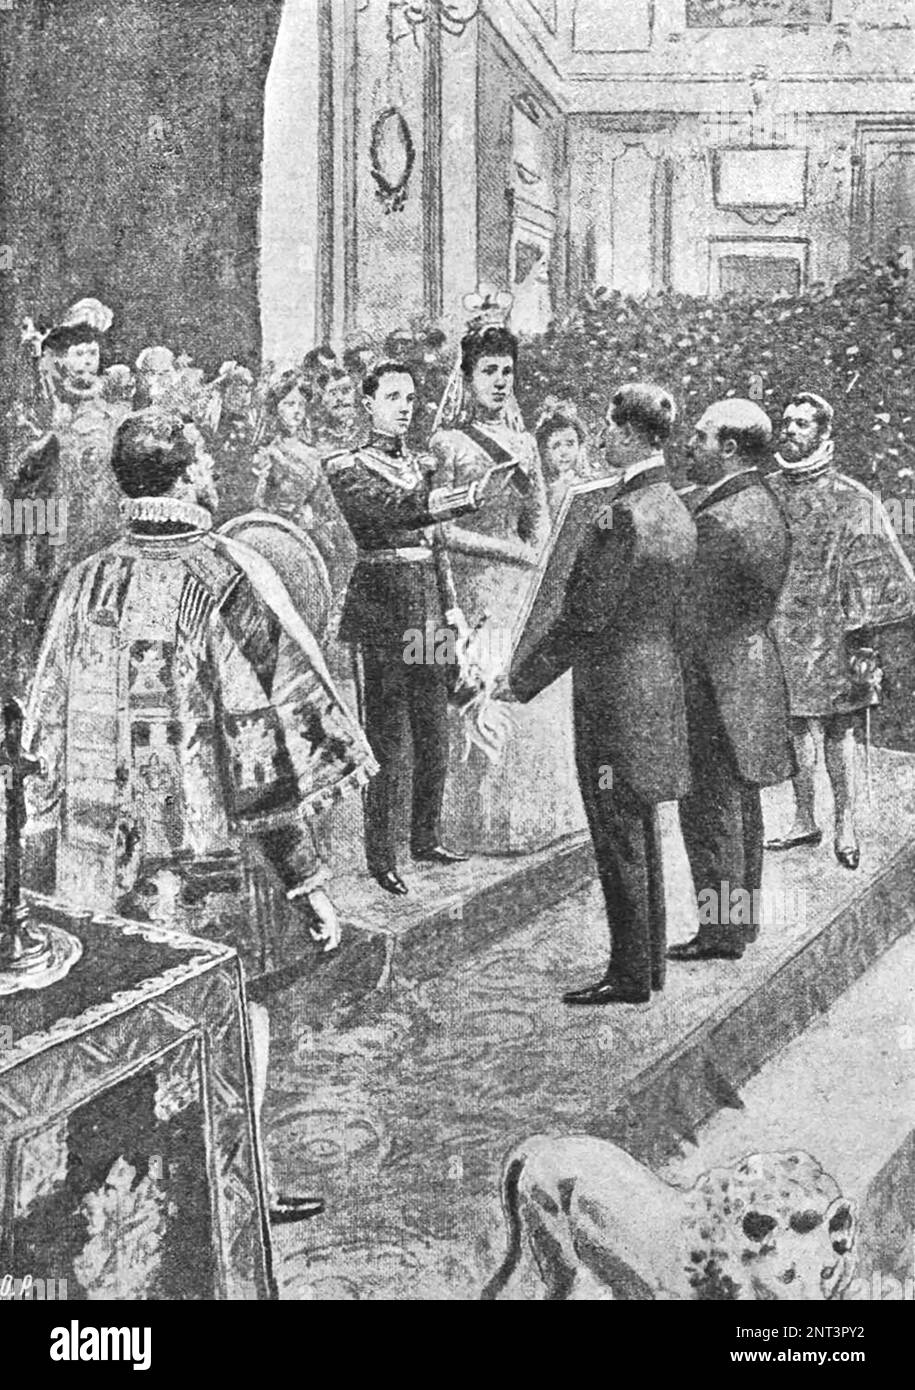 Accession of King Alfonso XIII to the throne. Taking the oath by King Alfonso XIII of allegiance to the constitution in the presence of the president and deputies. Illustration from 1902. Stock Photo